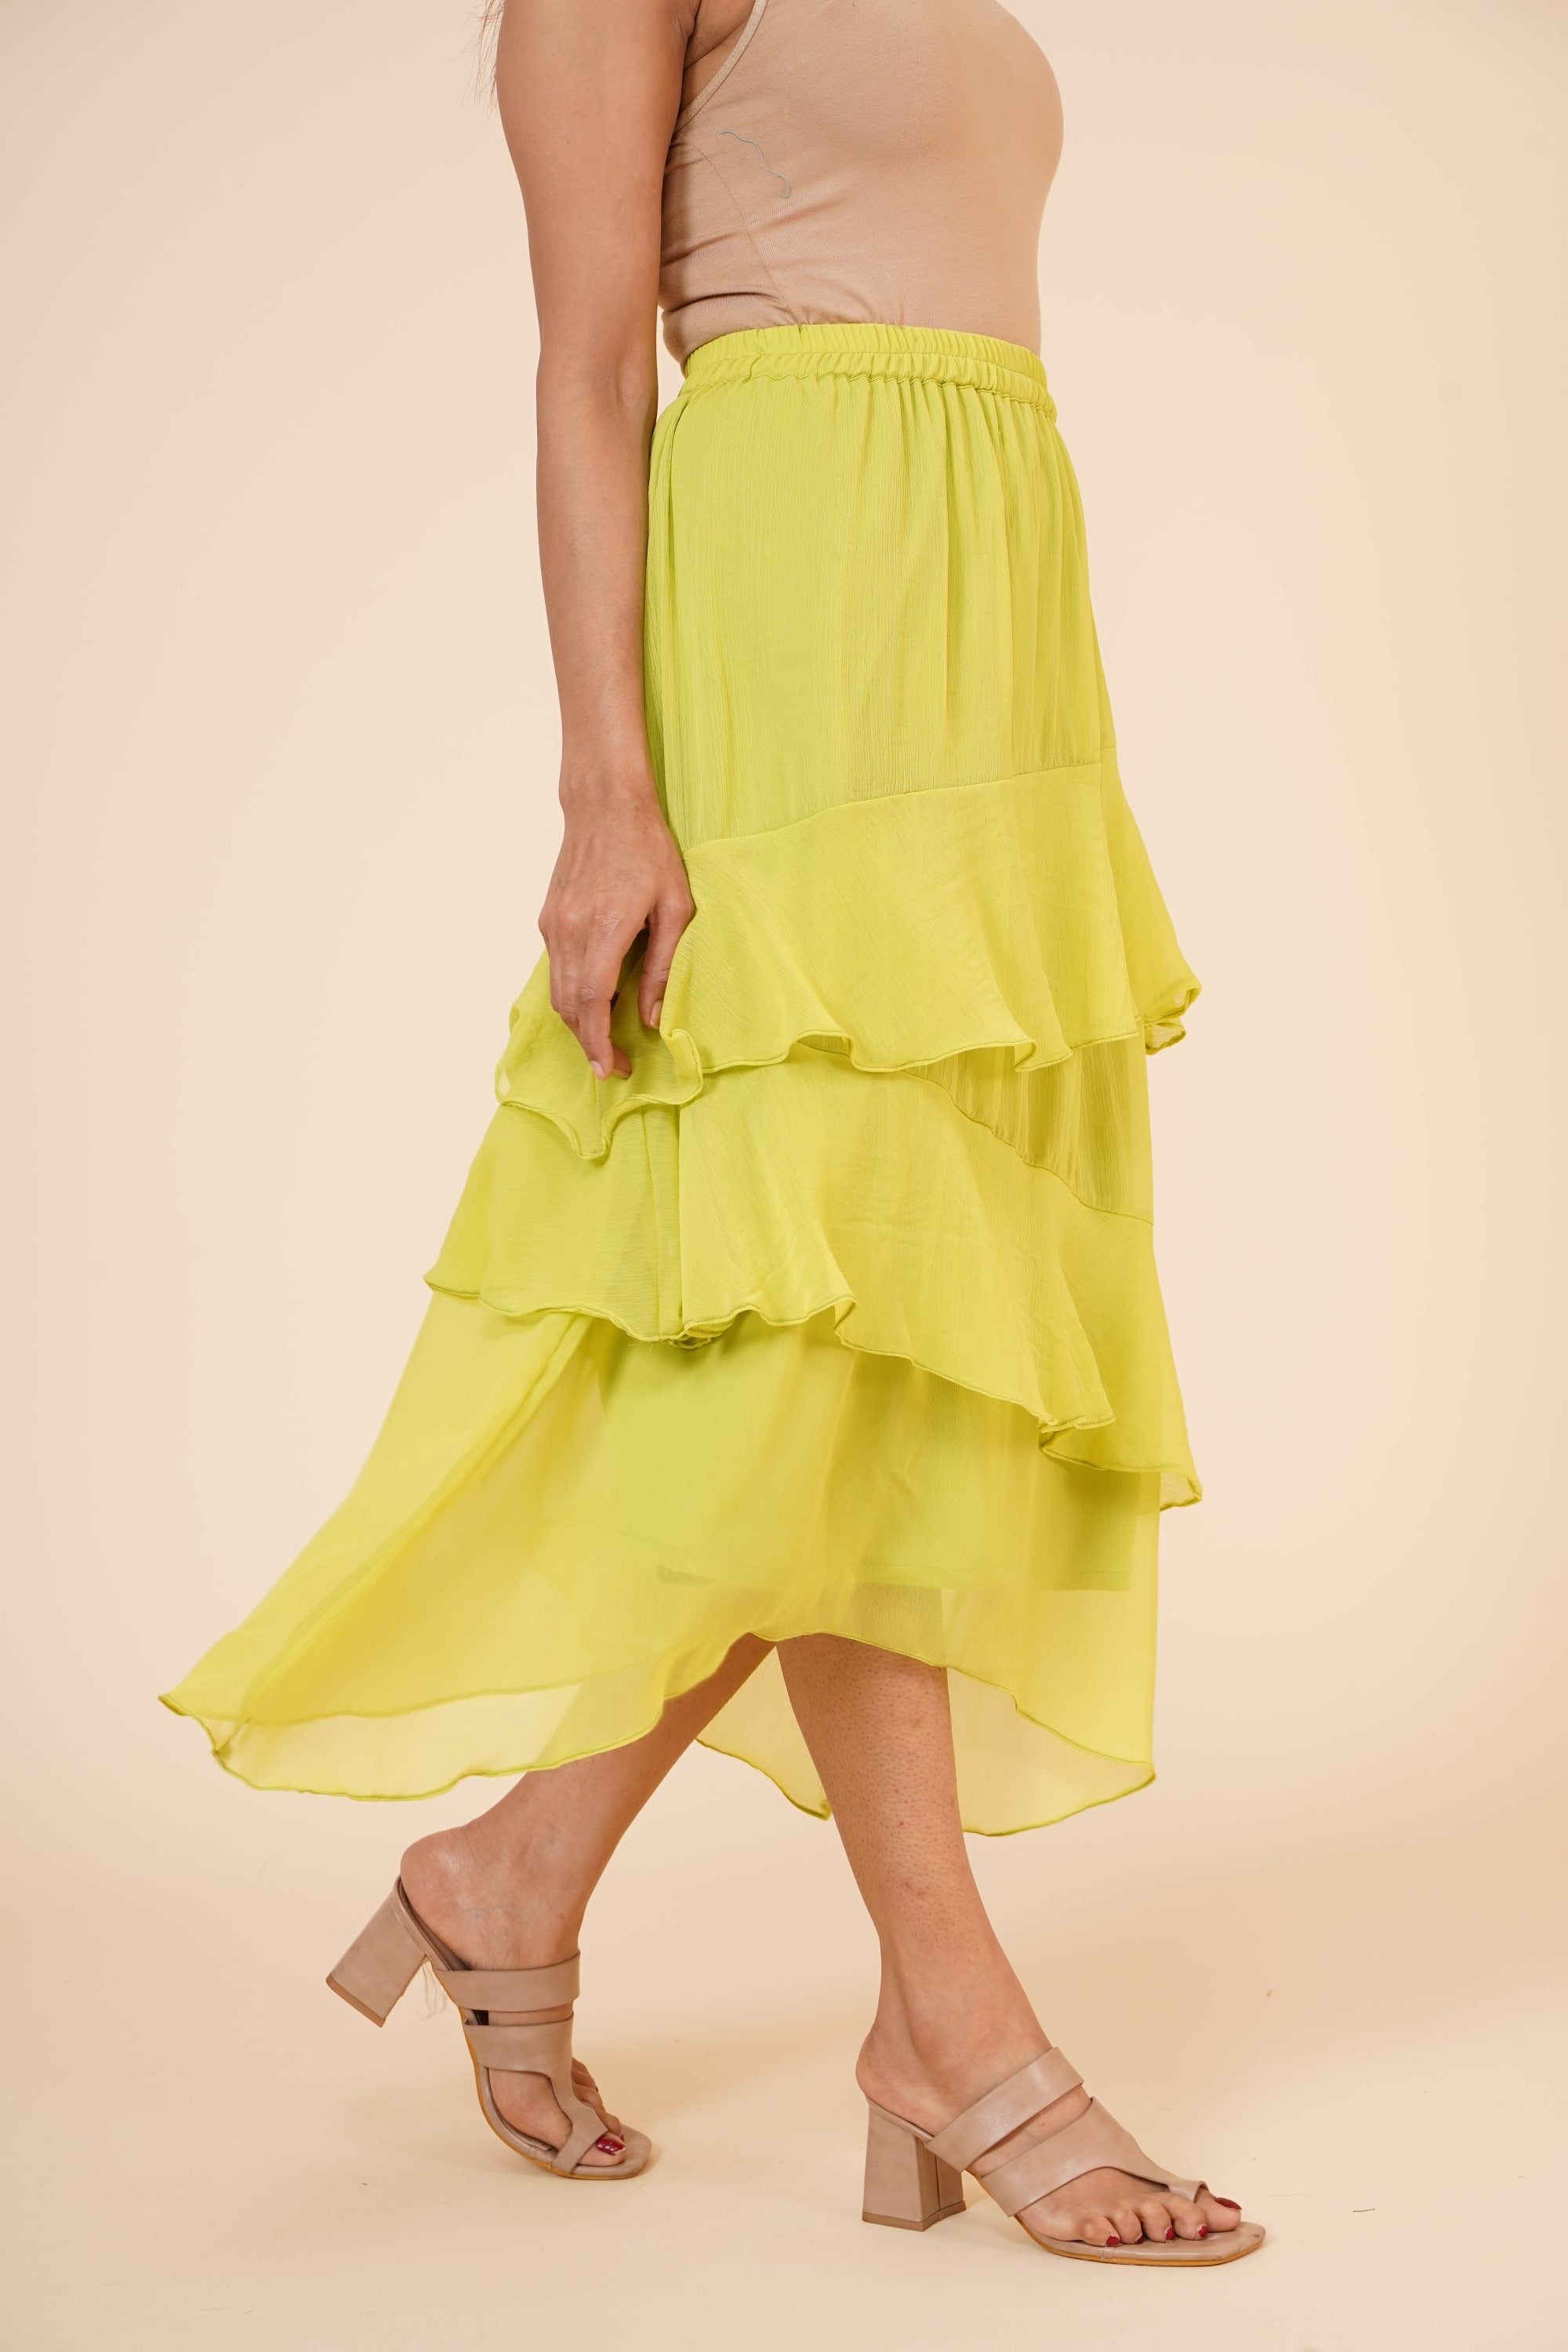 Women's Chiffon Ruffle Skirt With Elastic In Lime Green - MIRACOLOS by Ruchi